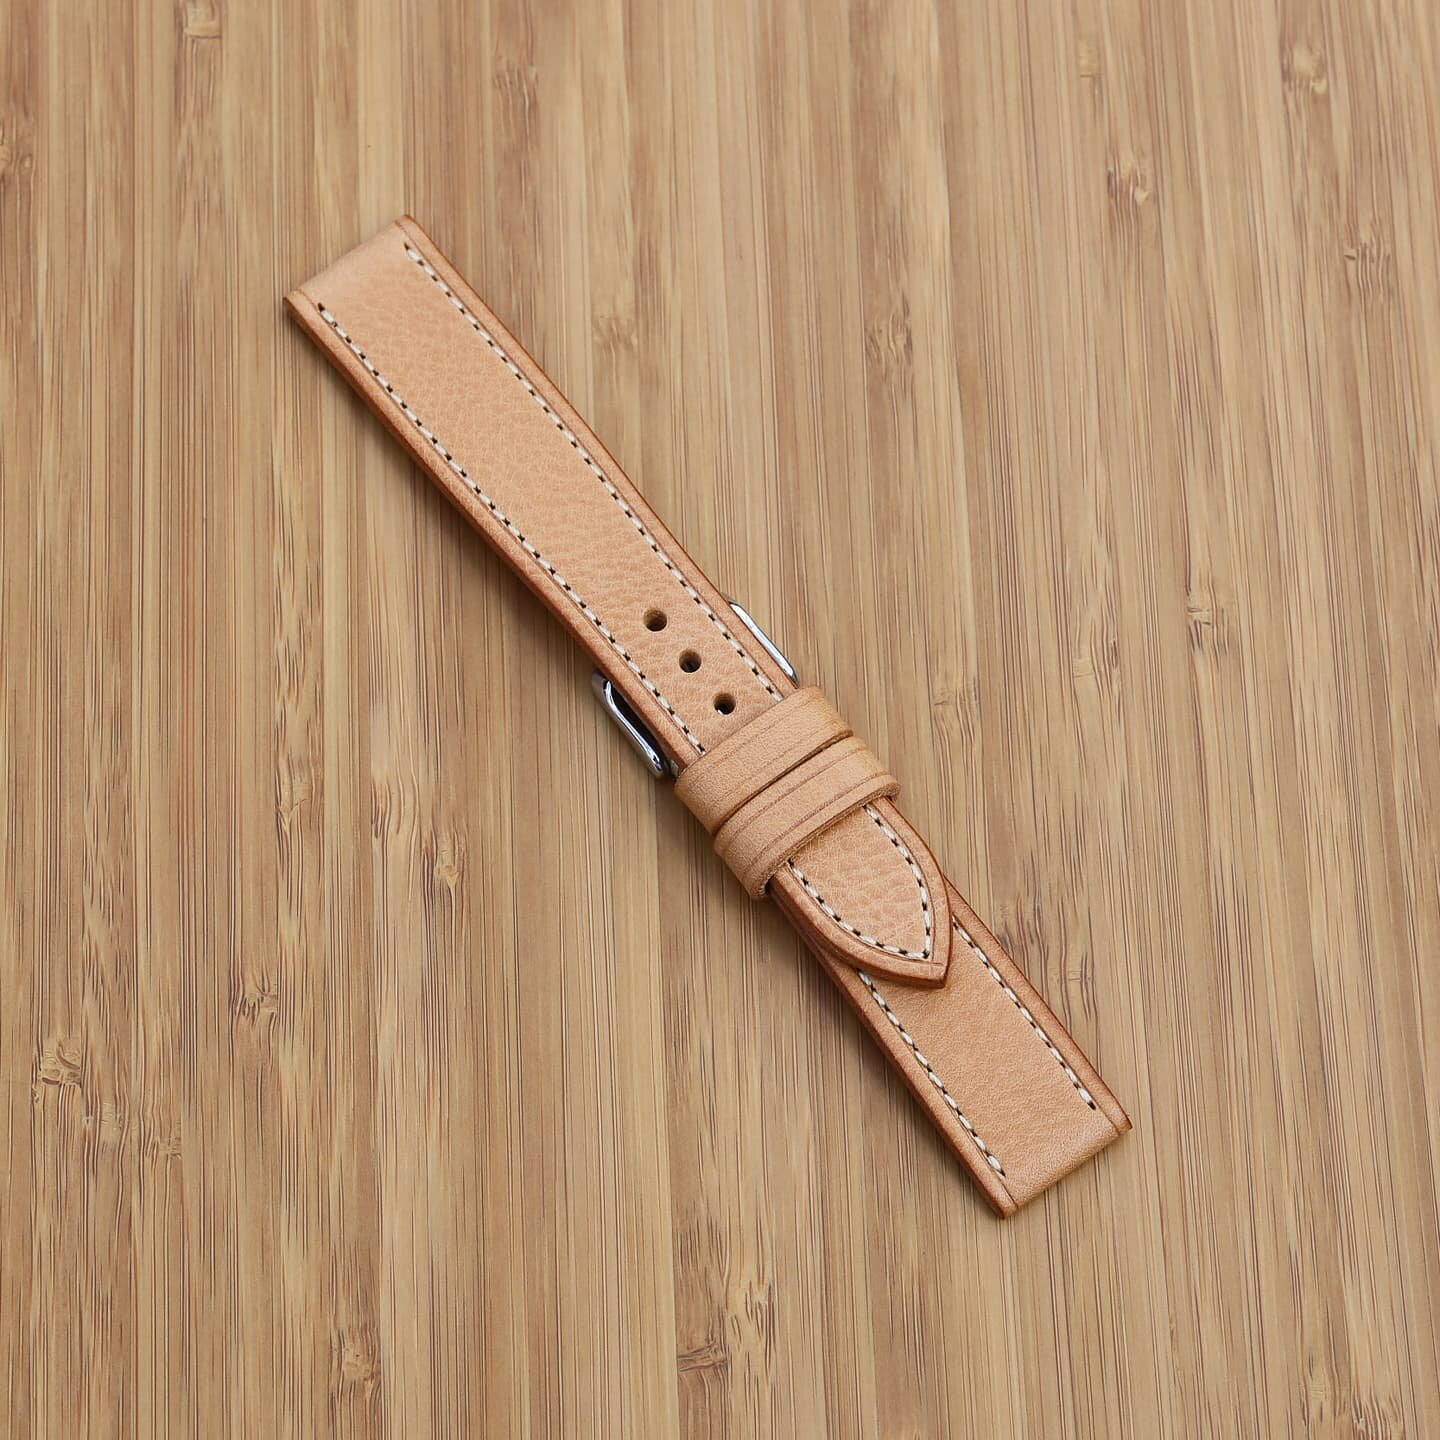 Natural La Perla 20/18mm watch strap. I am trying out some straps with a smaller thread combo. What do yall think?

#watchfam #watchesofinstagram #watches #watchaddict #watchoftheday #luxurywatches #timezonetweets #watchtimemagazine&nbsp; #レザー
#レザークラ